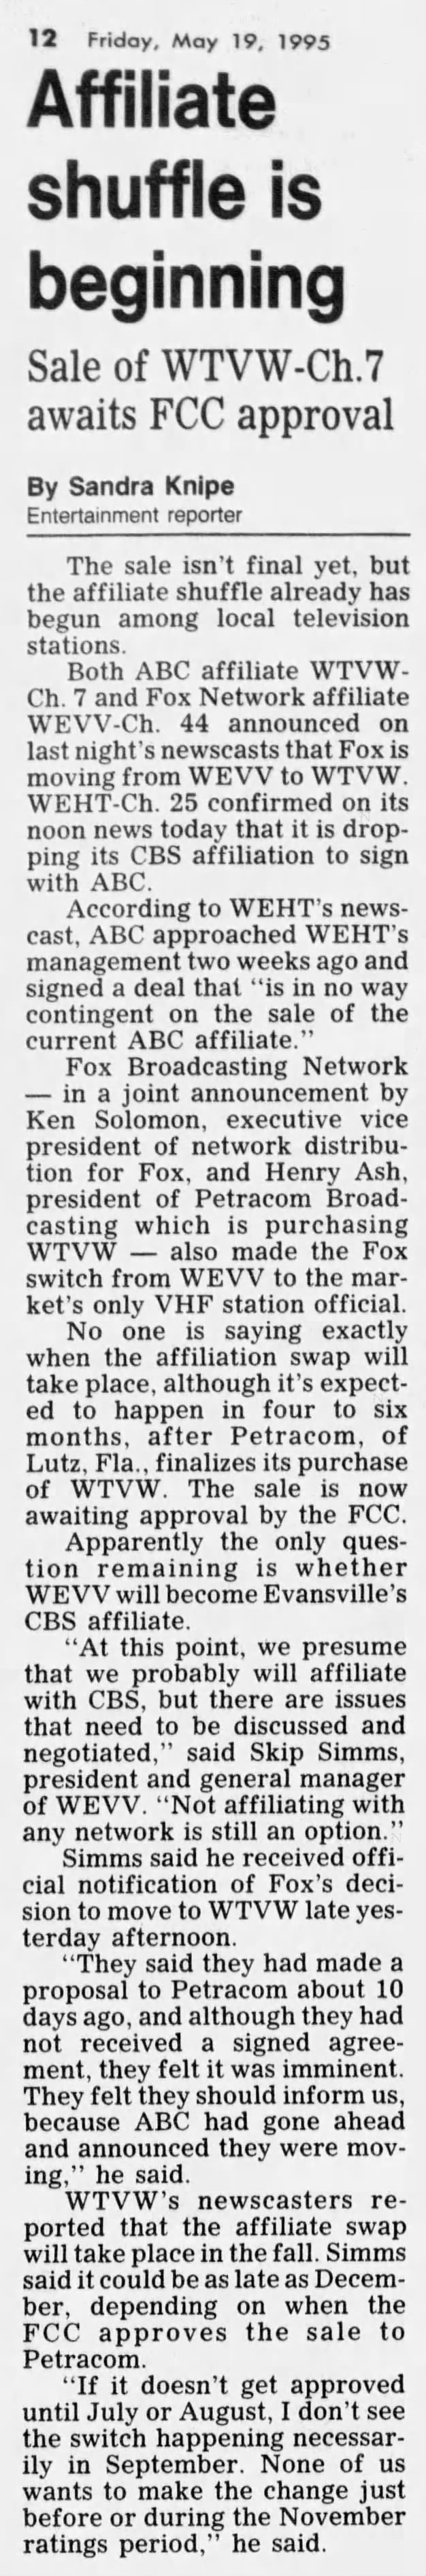 Affiliate shuffle is beginning: Sale of WTVW-Ch. 7 awaits FCC approval